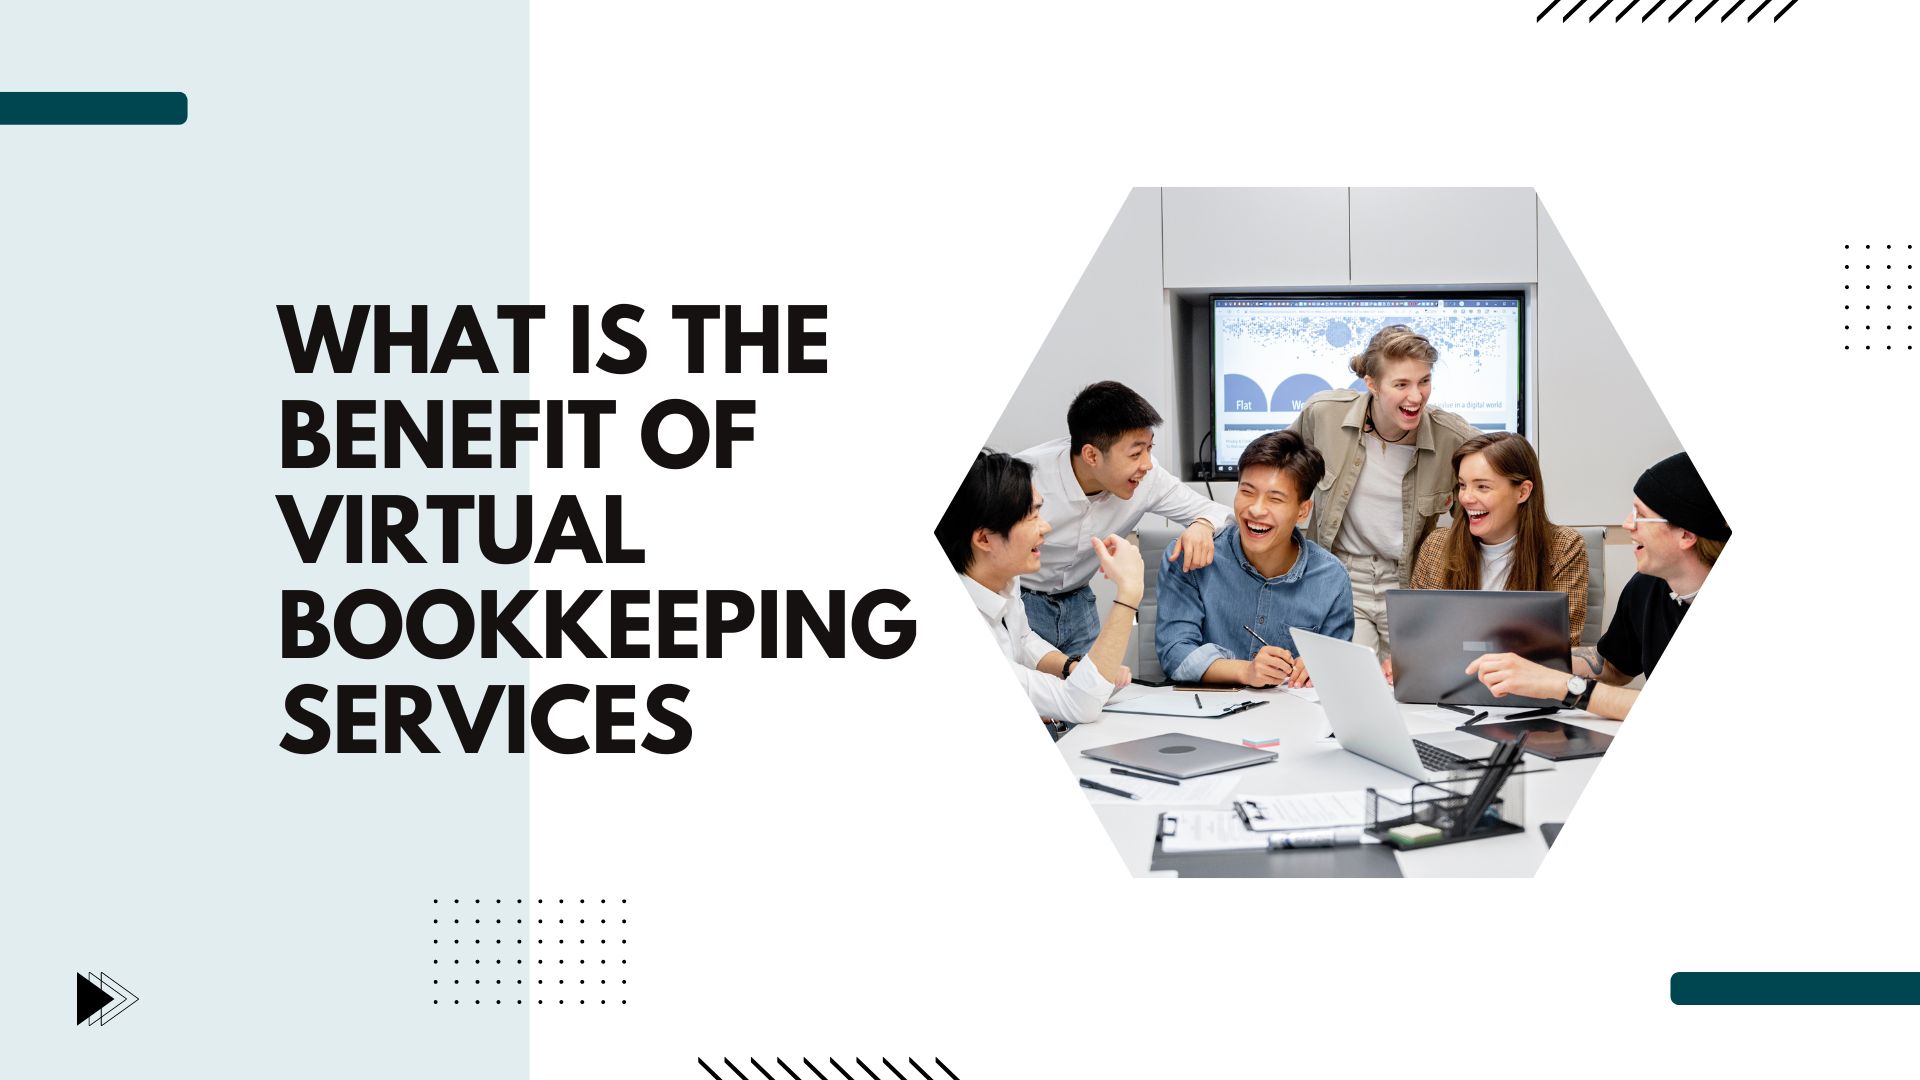 What are the benefits of Virtual bookkeeping services